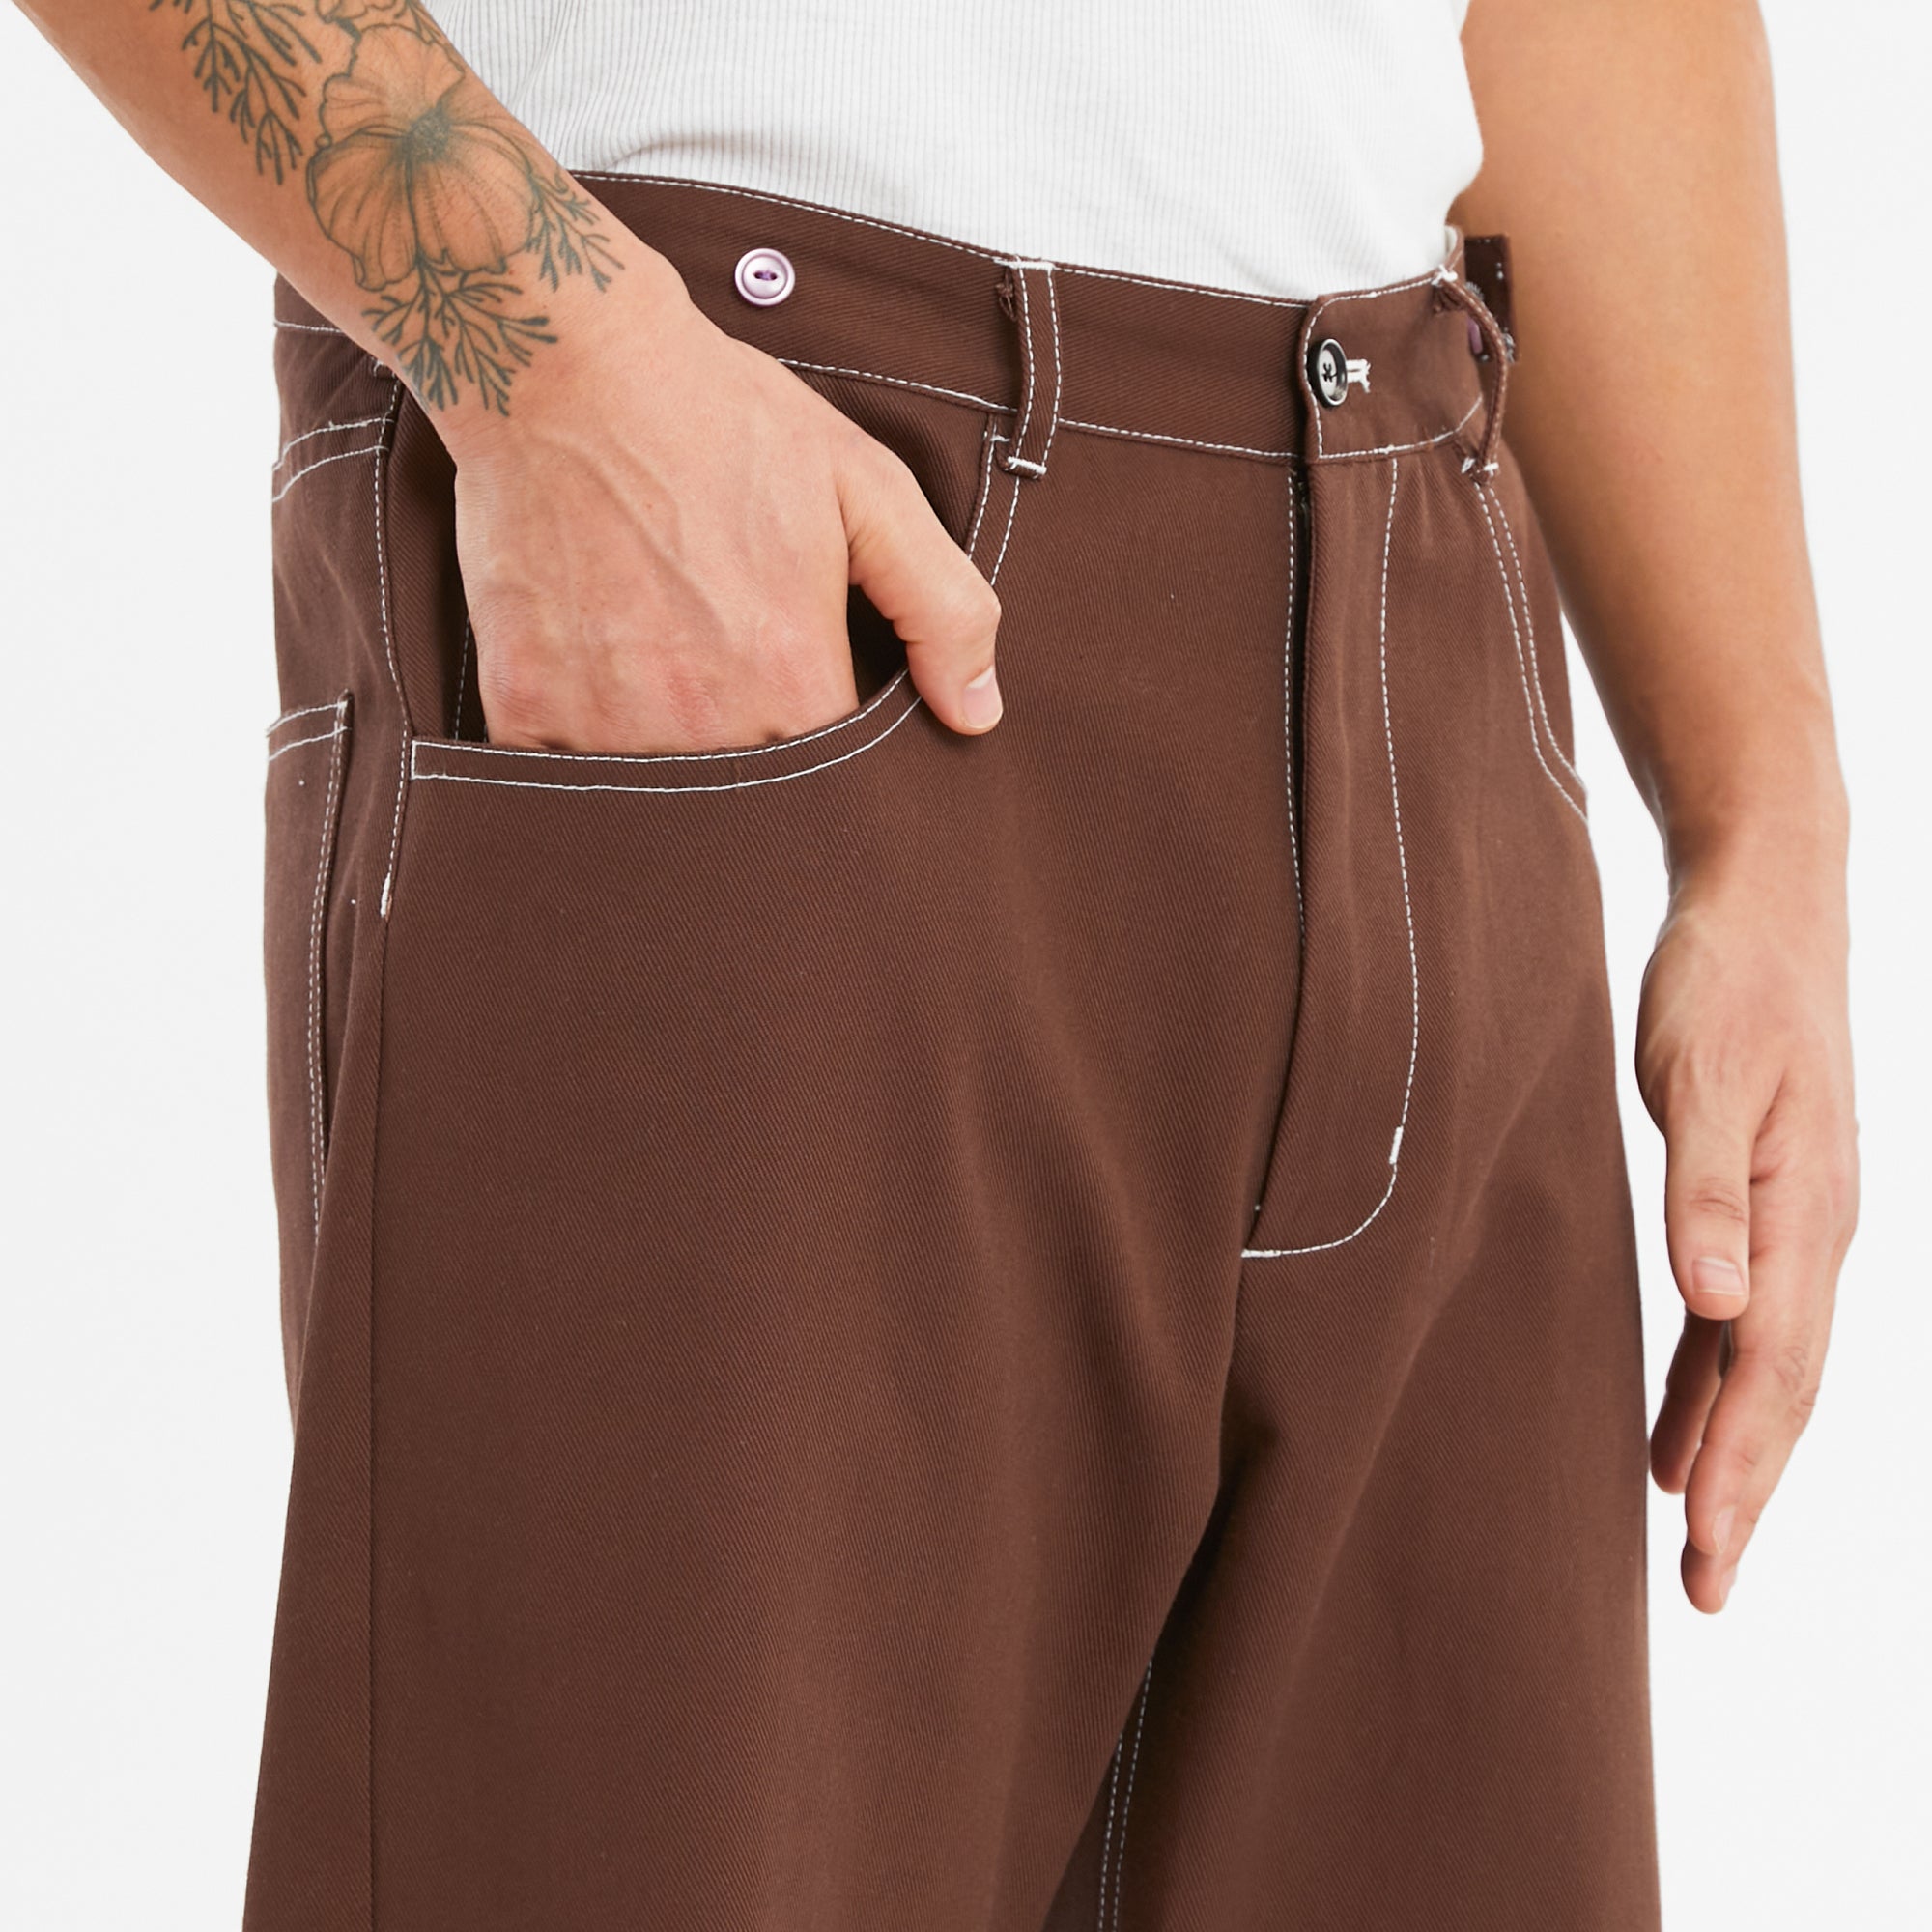 Ranch Pant - Brown Cotton Twill WR/SR – s.k. manor hill